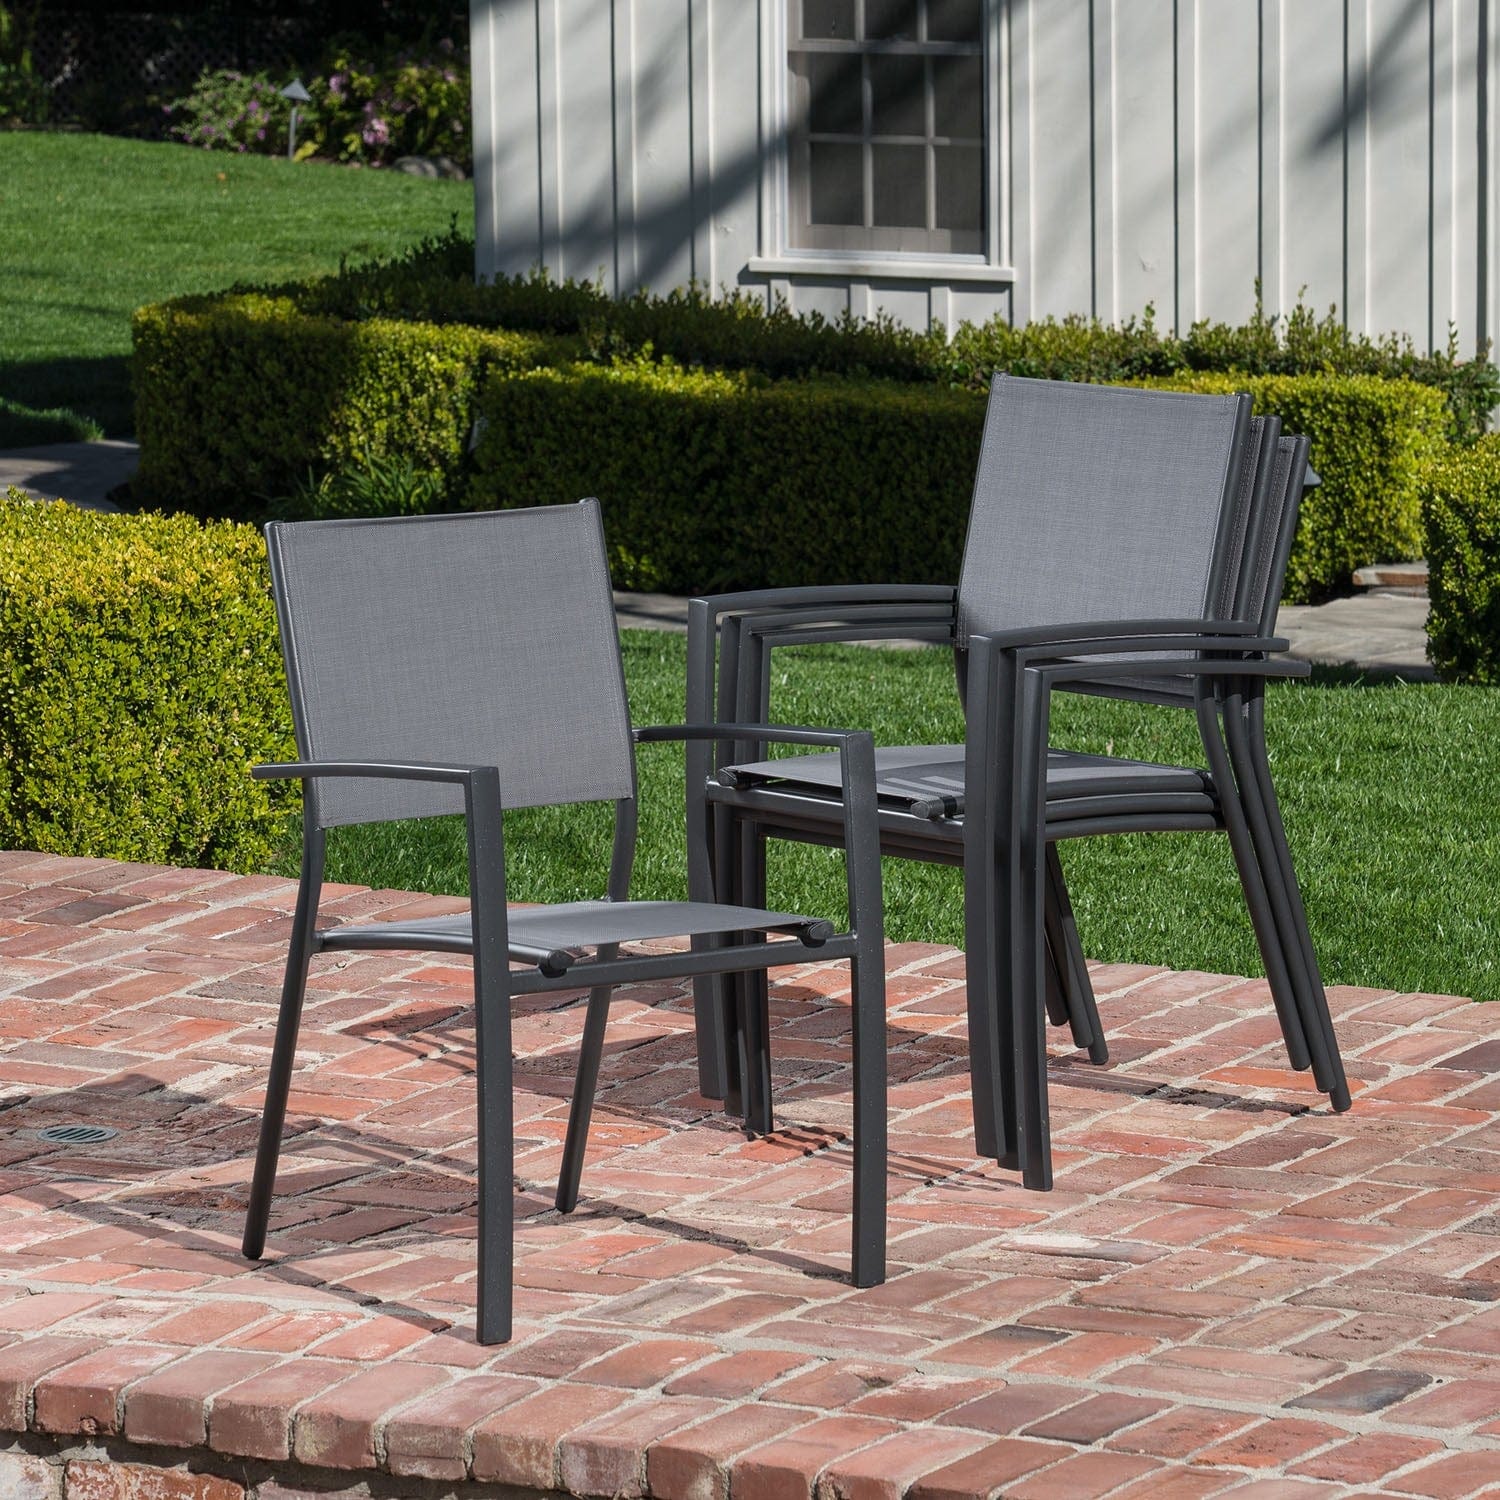 Hanover Outdoor Dining Set Hanover Cameron 7-Piece Expandable Dining Set with 6 Sling Dining Chairs and a 40" x 94" Table - CAMDN7PC-GRY